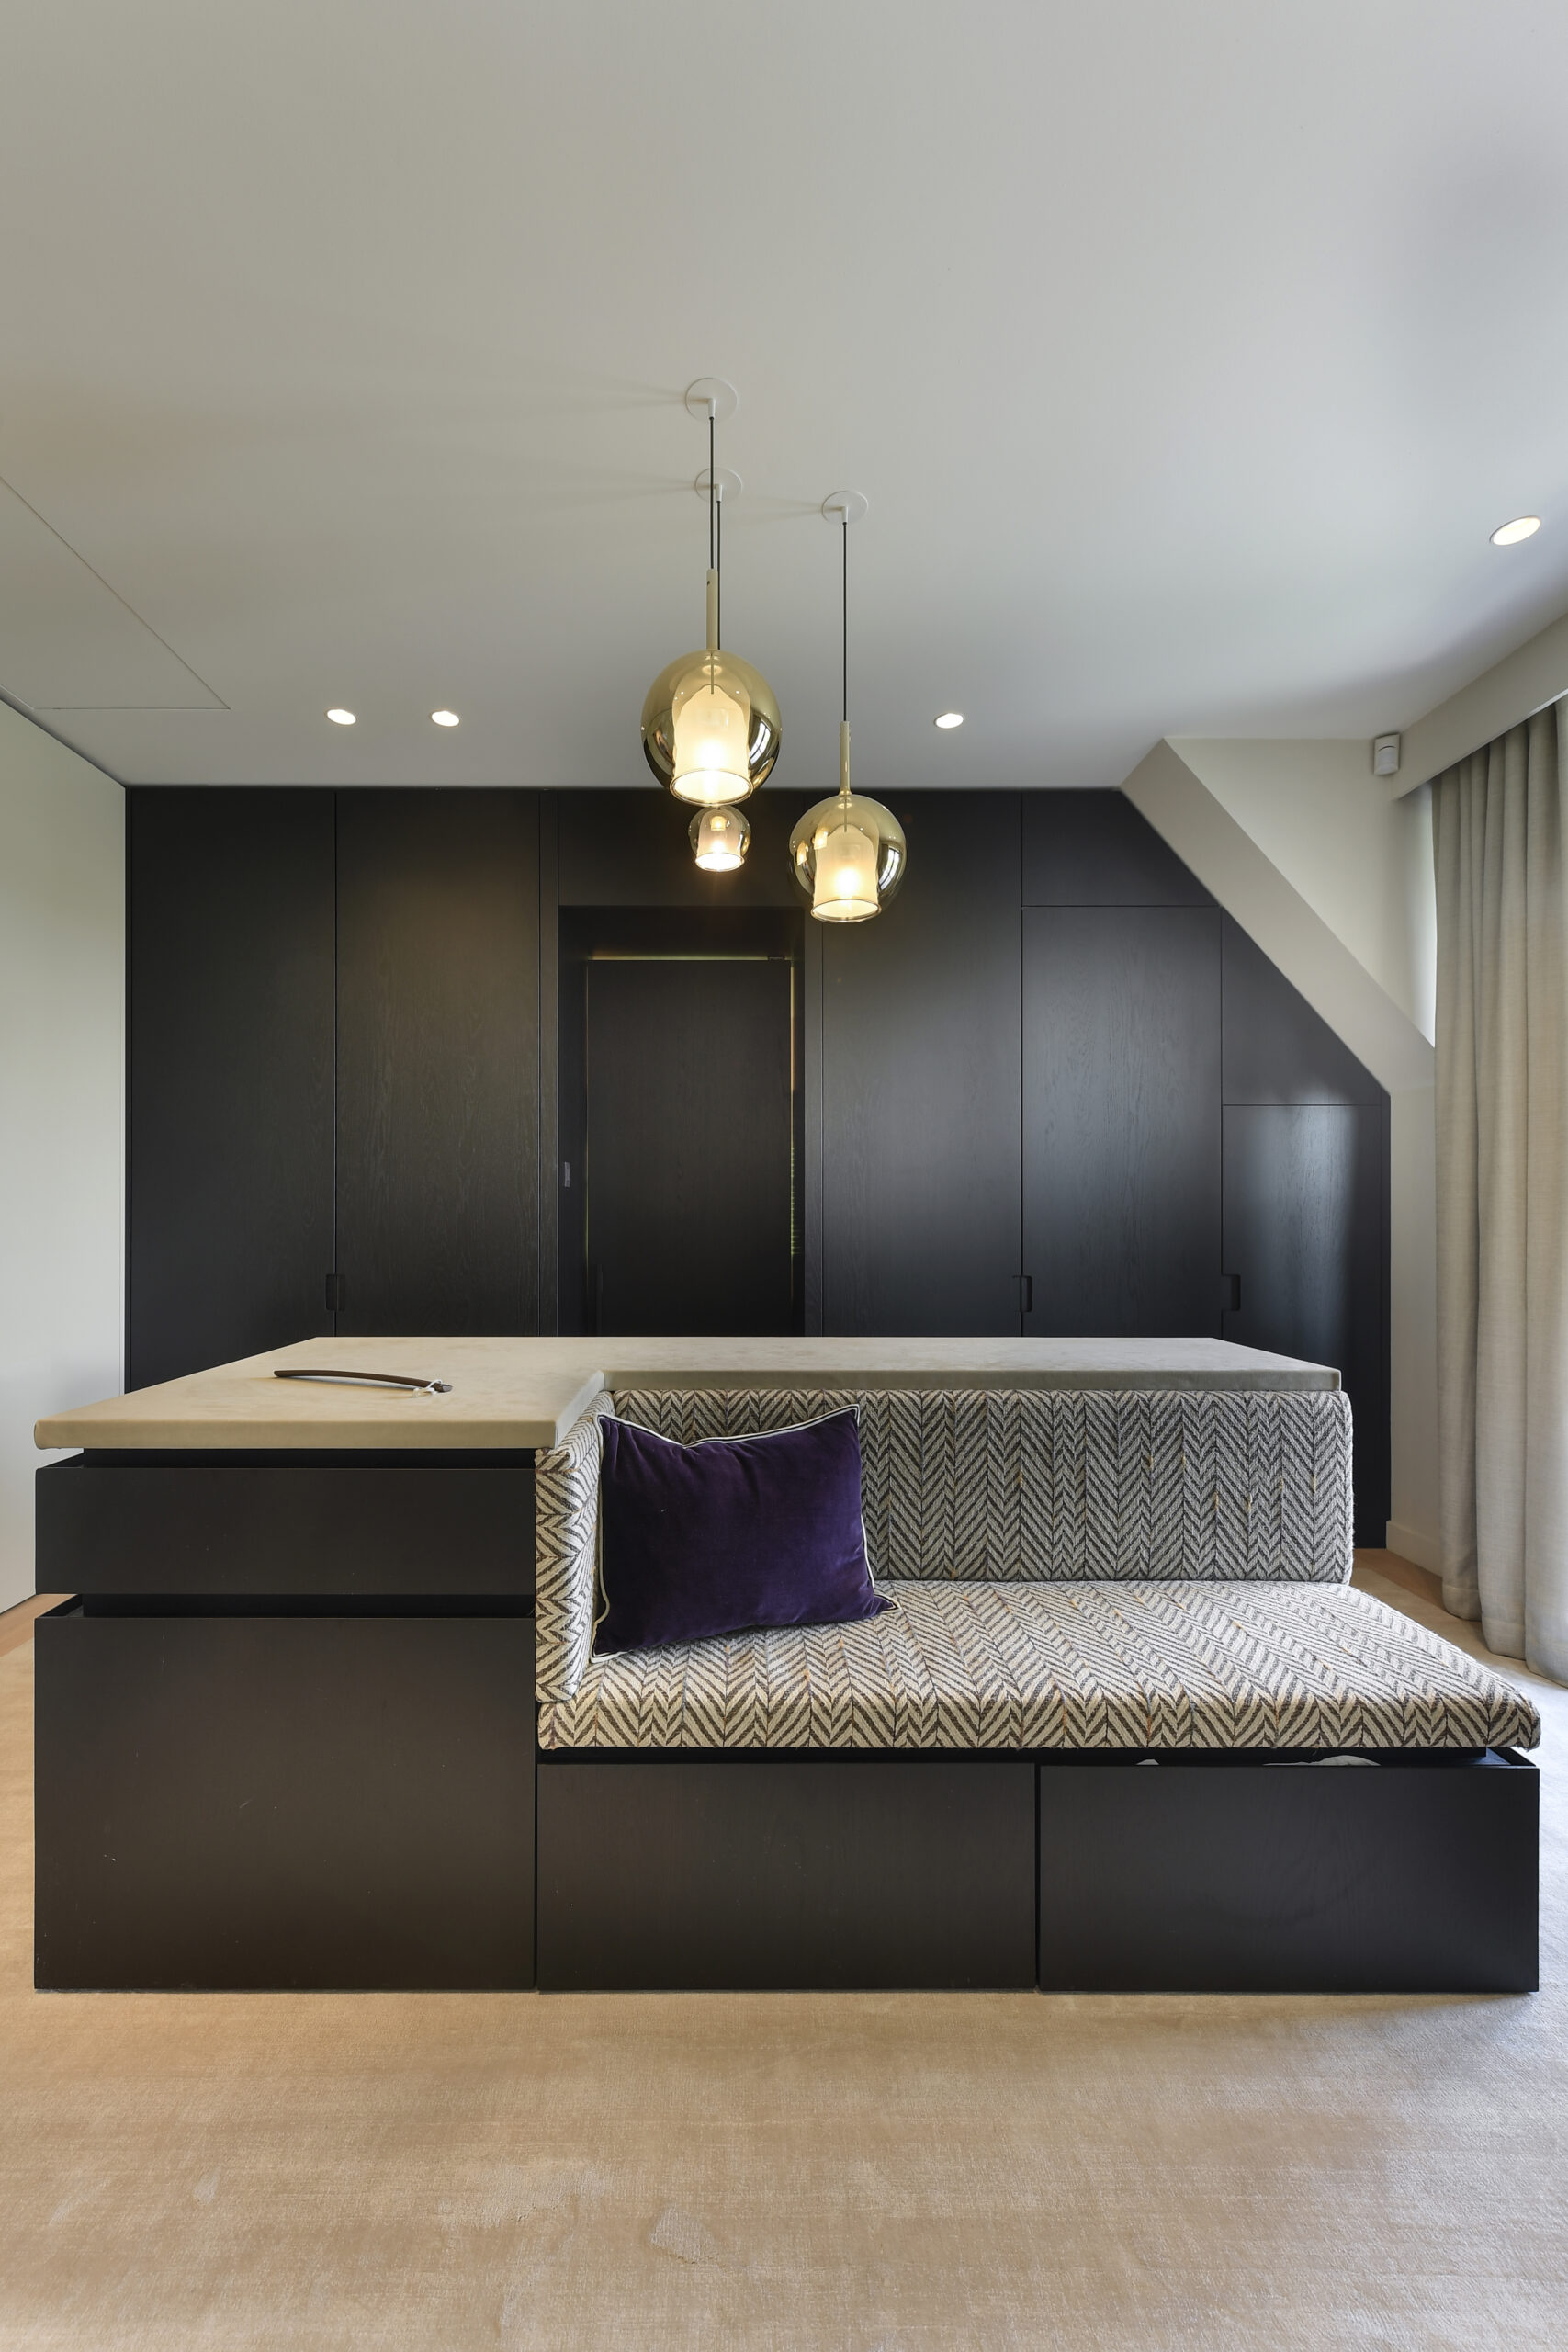 A modern interior space featuring a built-in seating area with a patterned cushion and a purple pillow. Above, there are three pendant lights with glass globes. Adjacent is a dark cabinetry unit, and the floor has a beige finish.